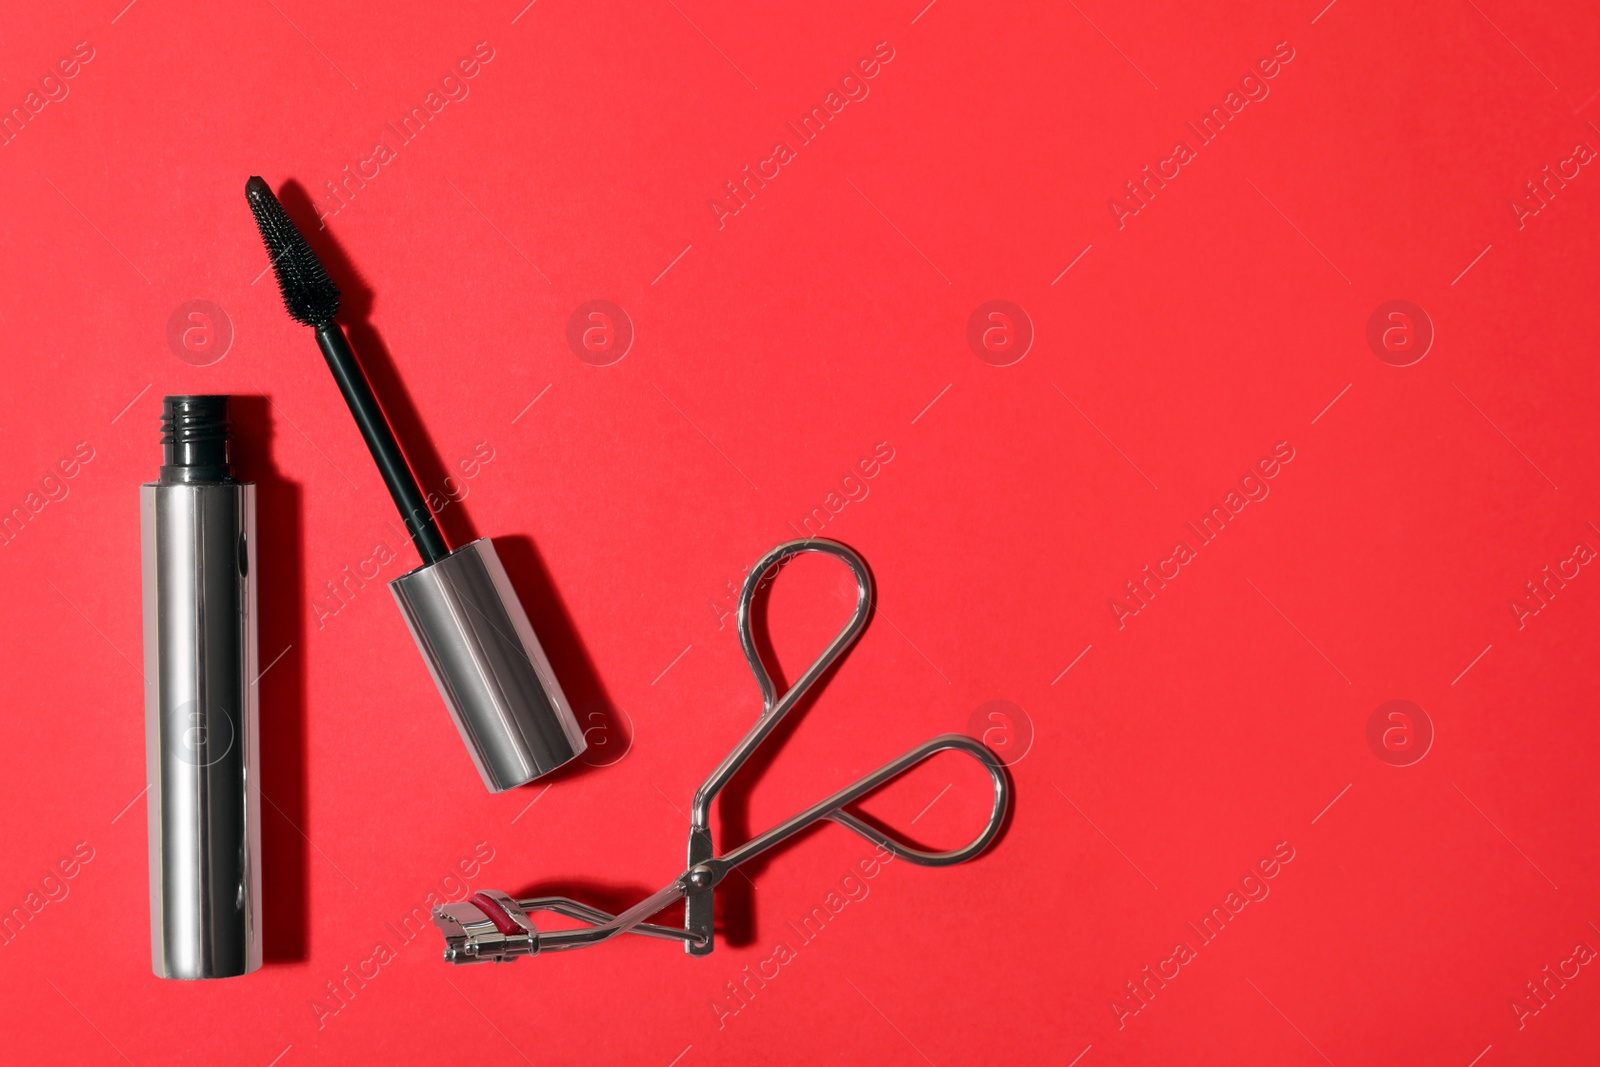 Photo of Black mascara and eyelash curler on red background, flat lay with space for text. Makeup product